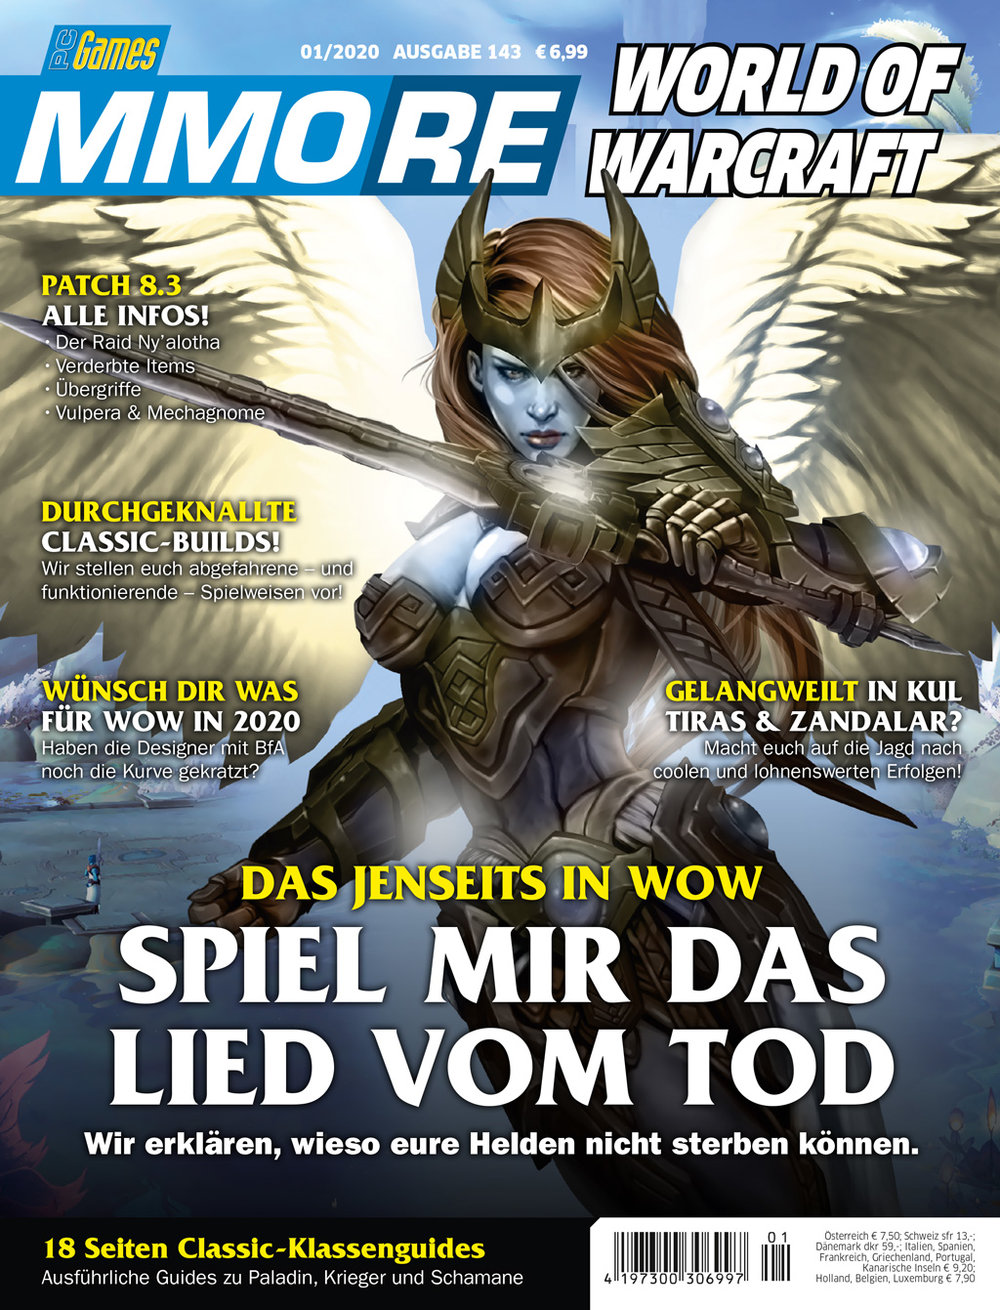 PC Games MMORE ePaper 01/2020